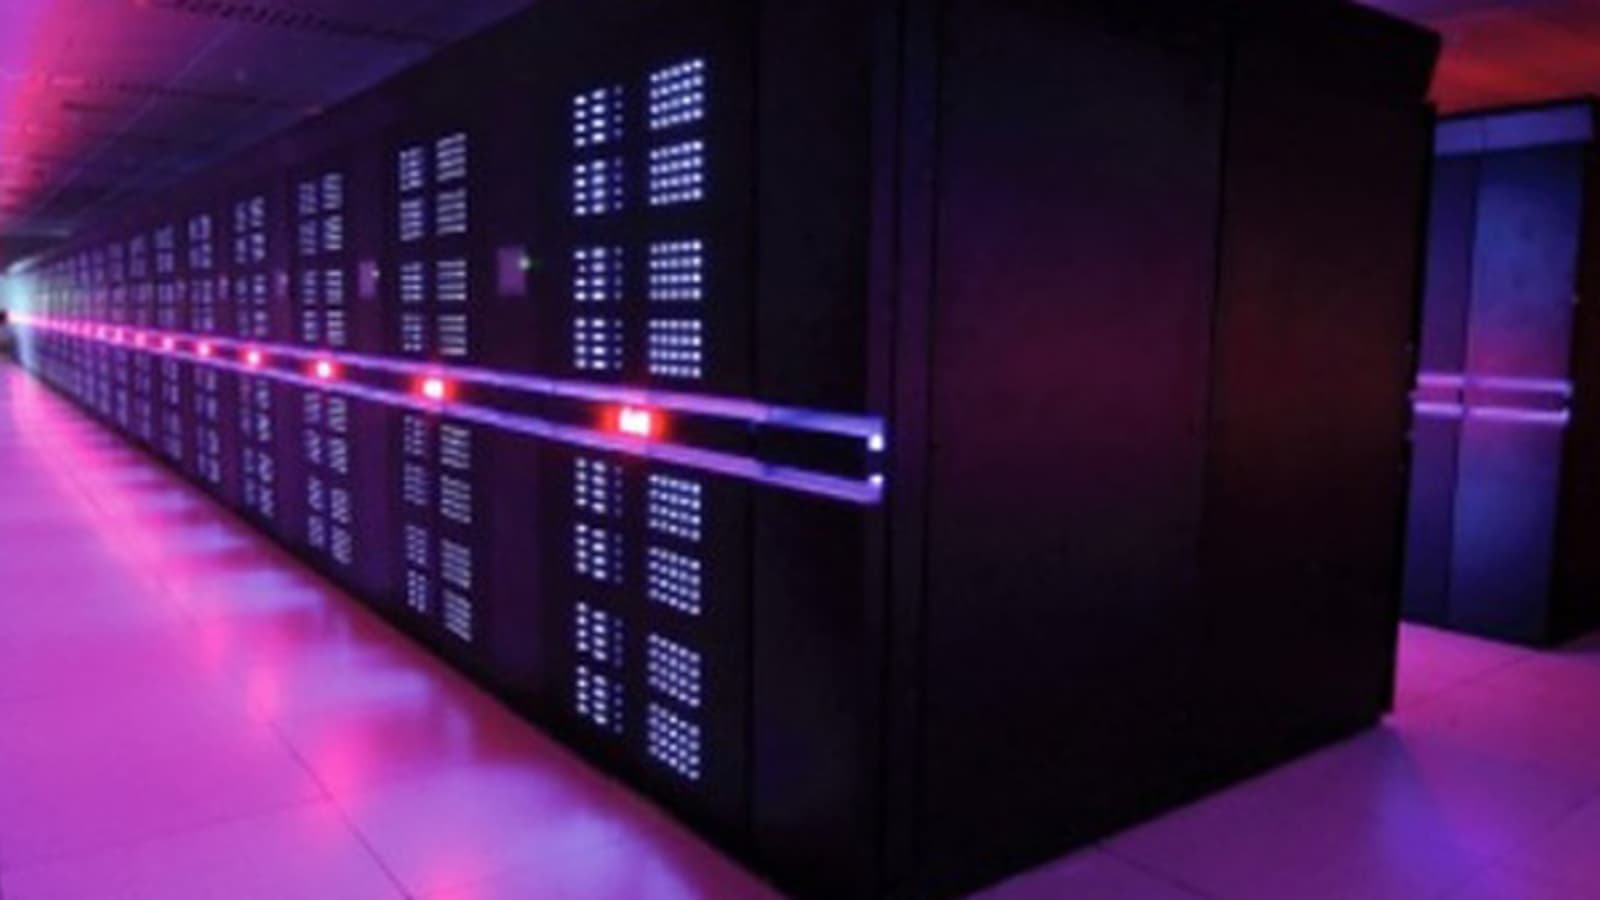 China Now Has World's Fastest Supercomputer